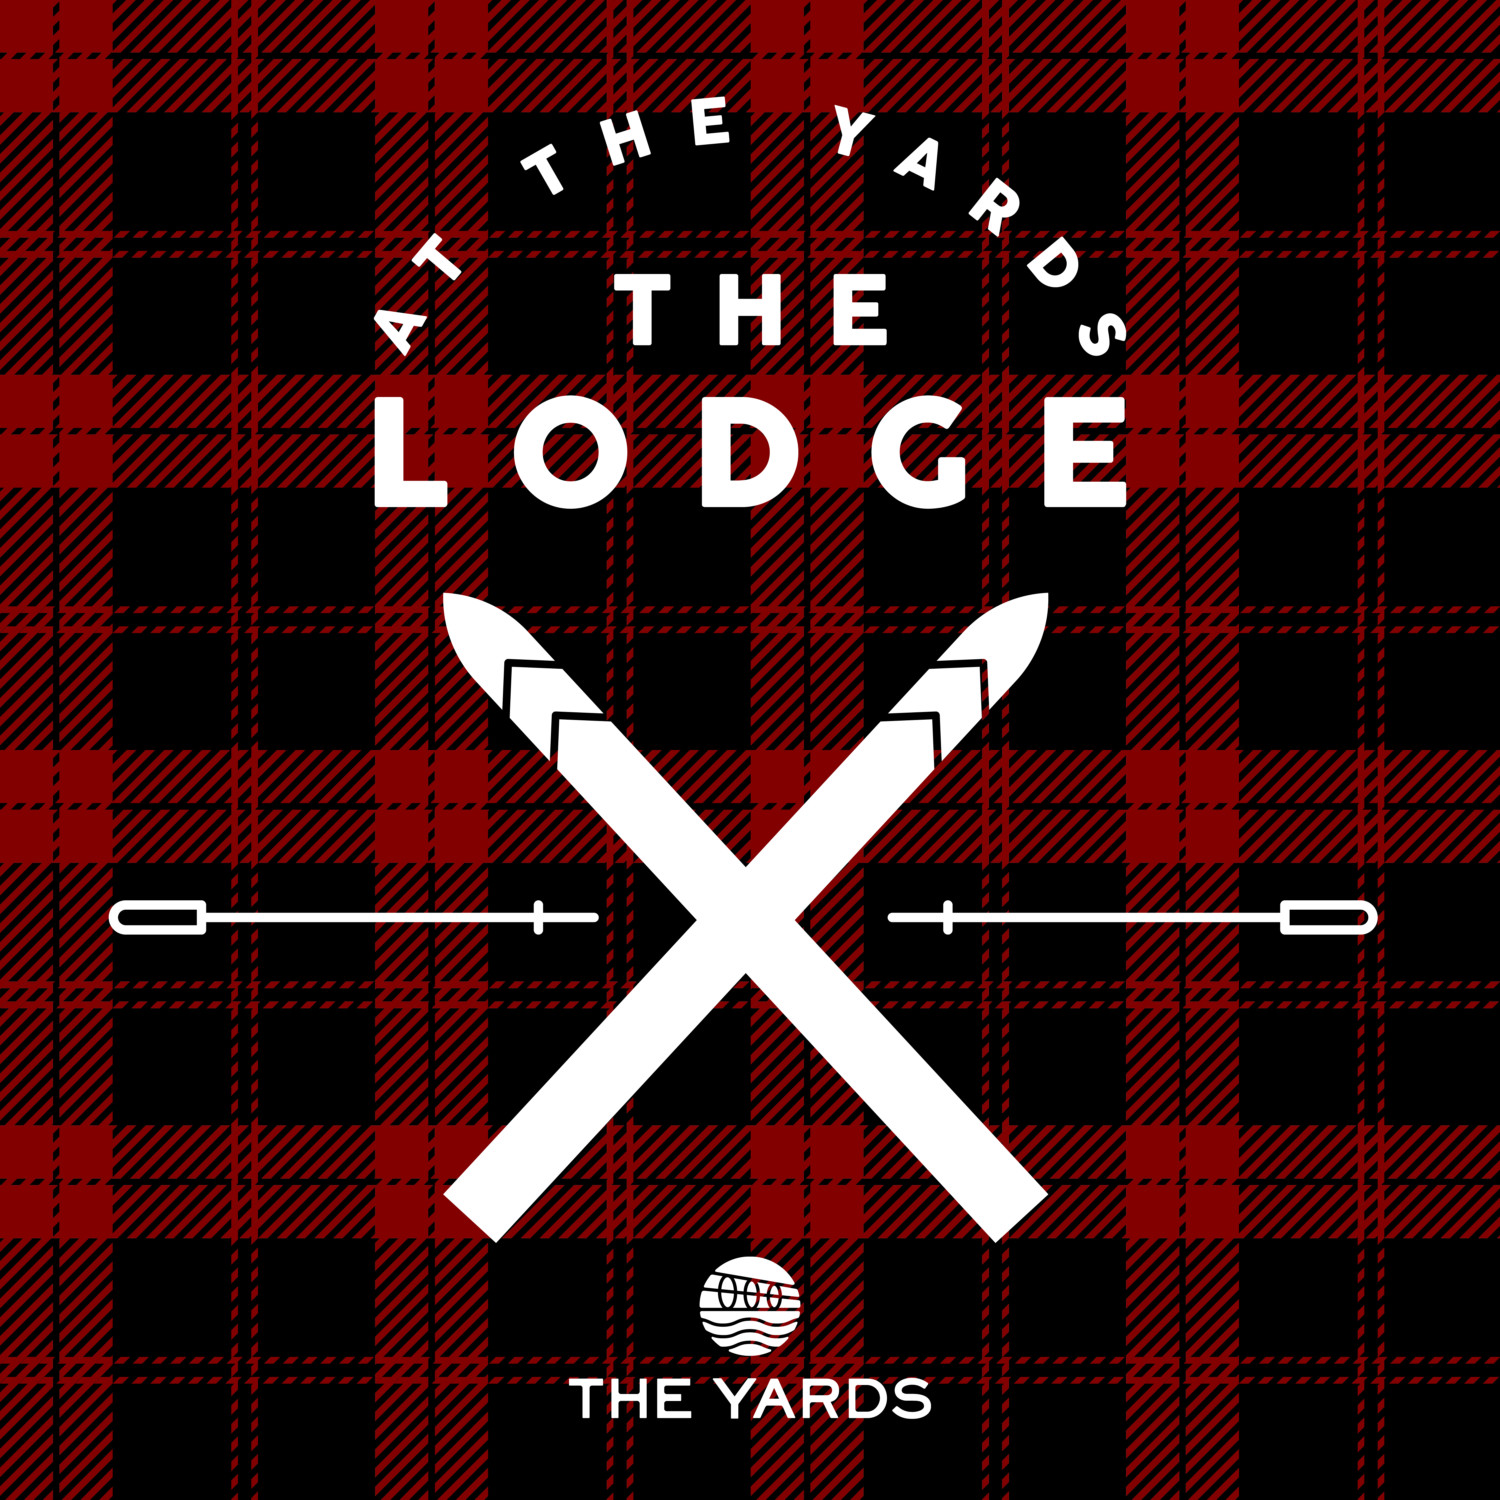 The Lodge at The Yards